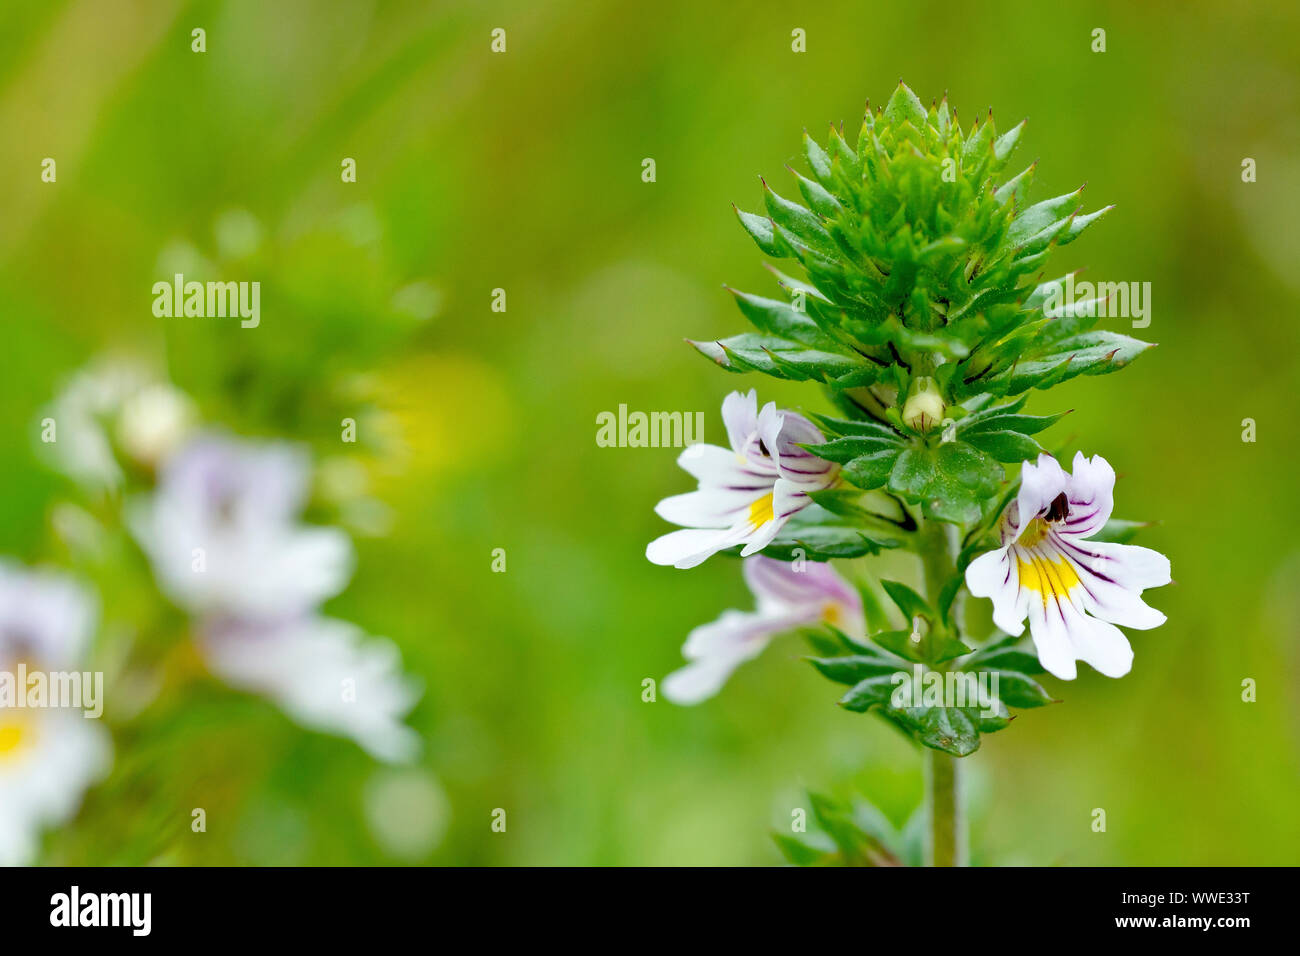 Eyebright (euphrasia officinalis), close up of a single plant showing detail of the small white flowers. Stock Photo